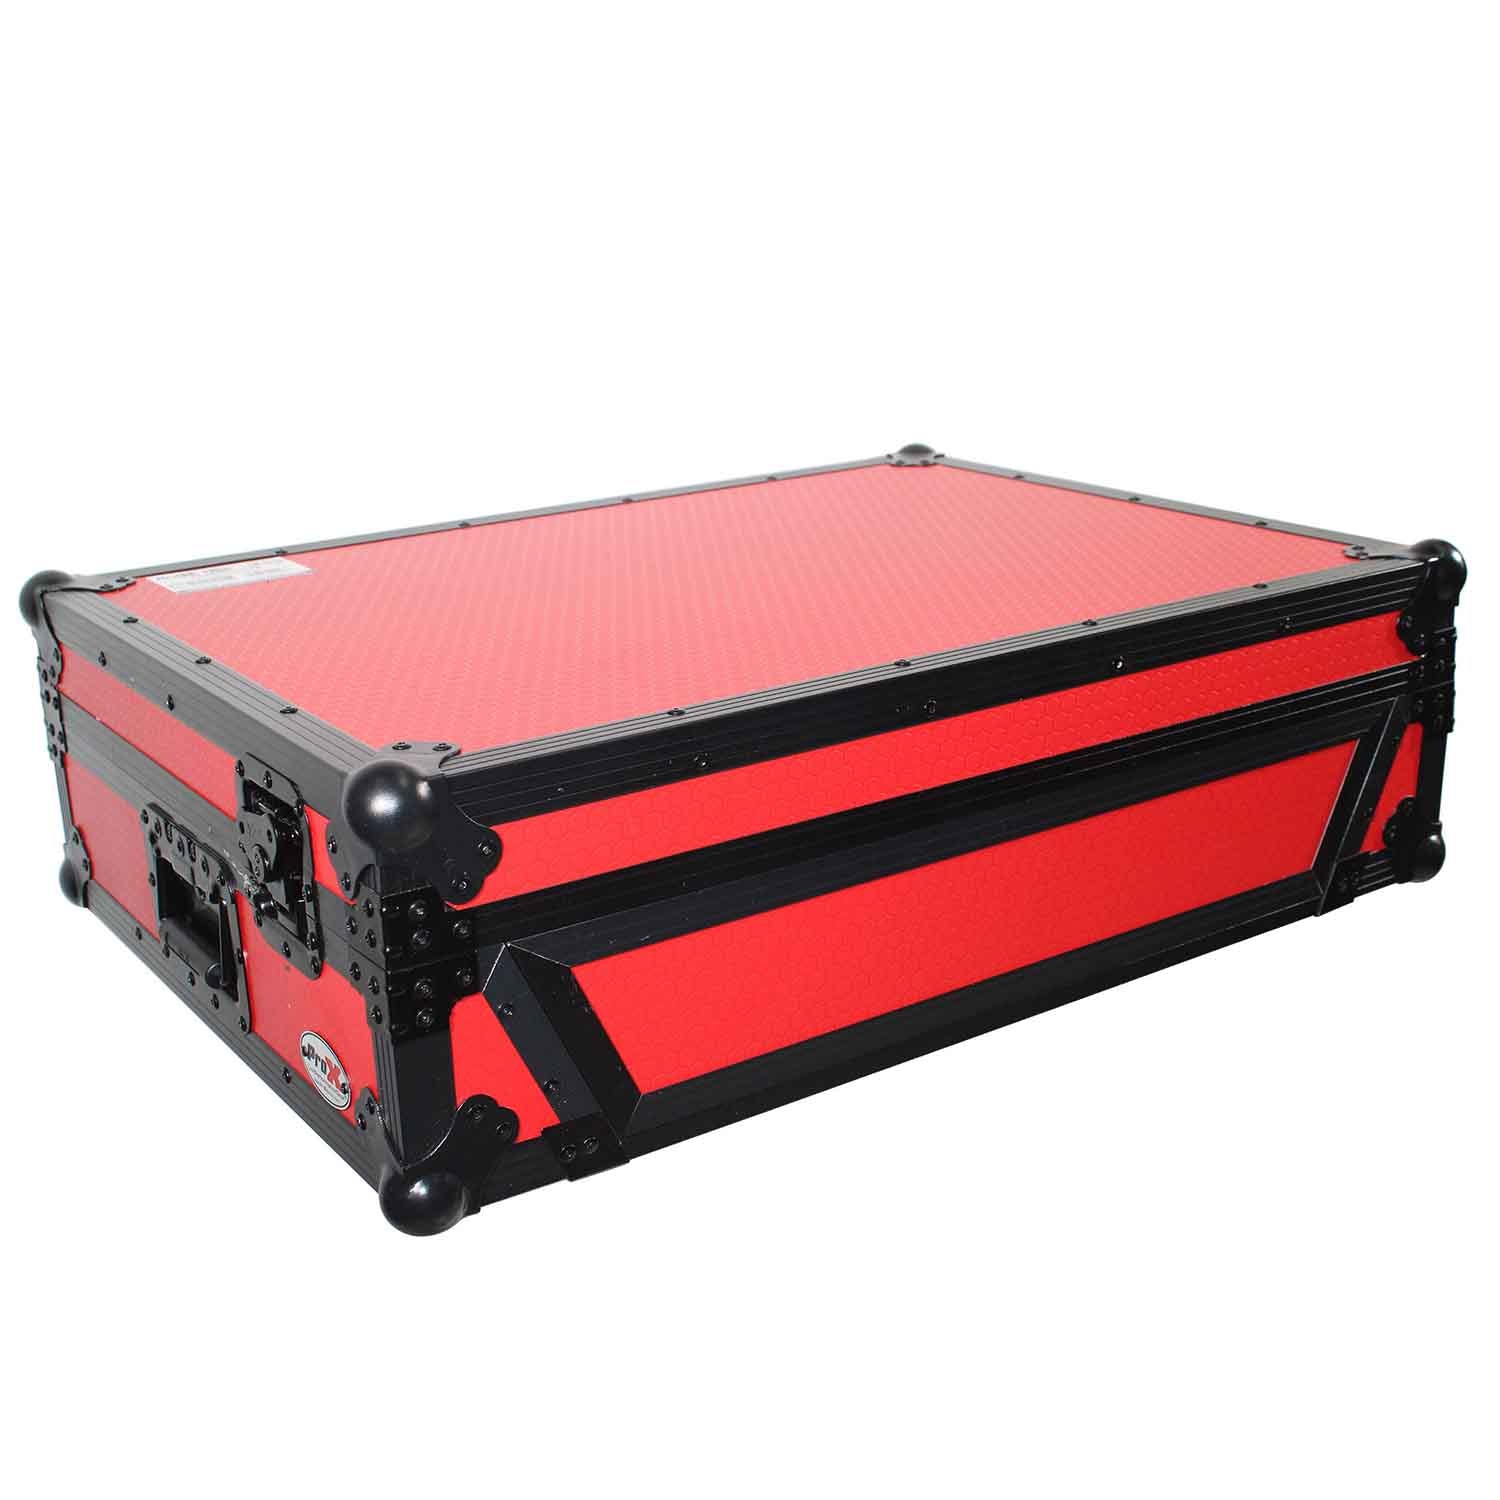 ProX XS-PRIME4 WRB, DJ Flight Case for Denon Prime 4 Standalone DJ System with Wheels - Black on Red - Hollywood DJ